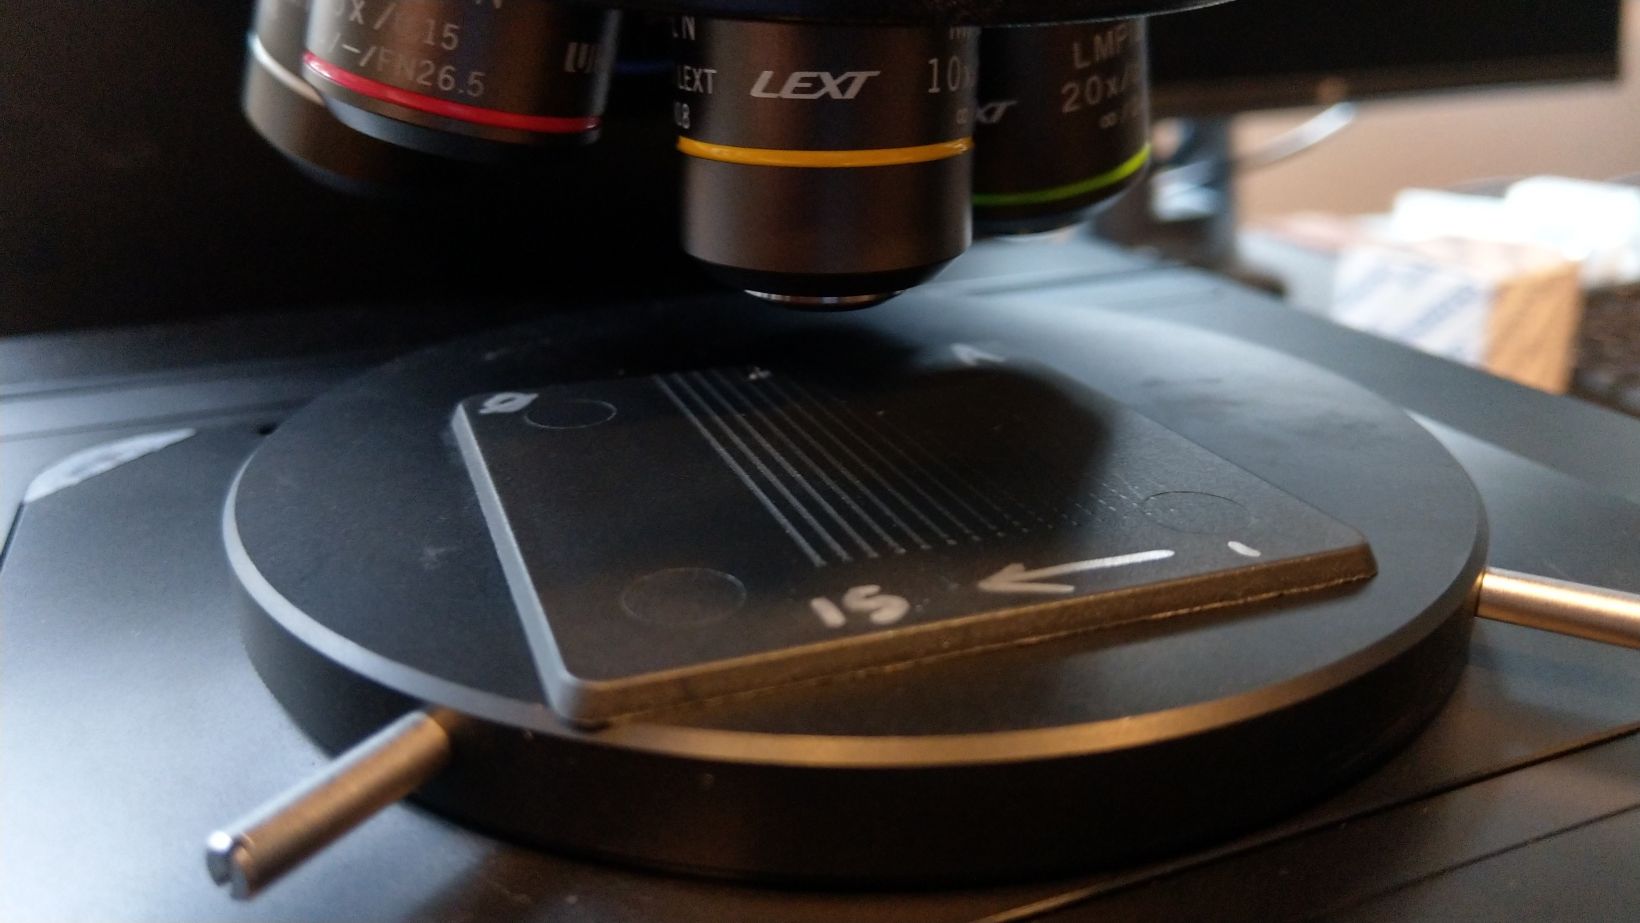 Olympus’ LEXT OLS5000 microscope can quickly create precise 3D maps of a sample following a scratch test.